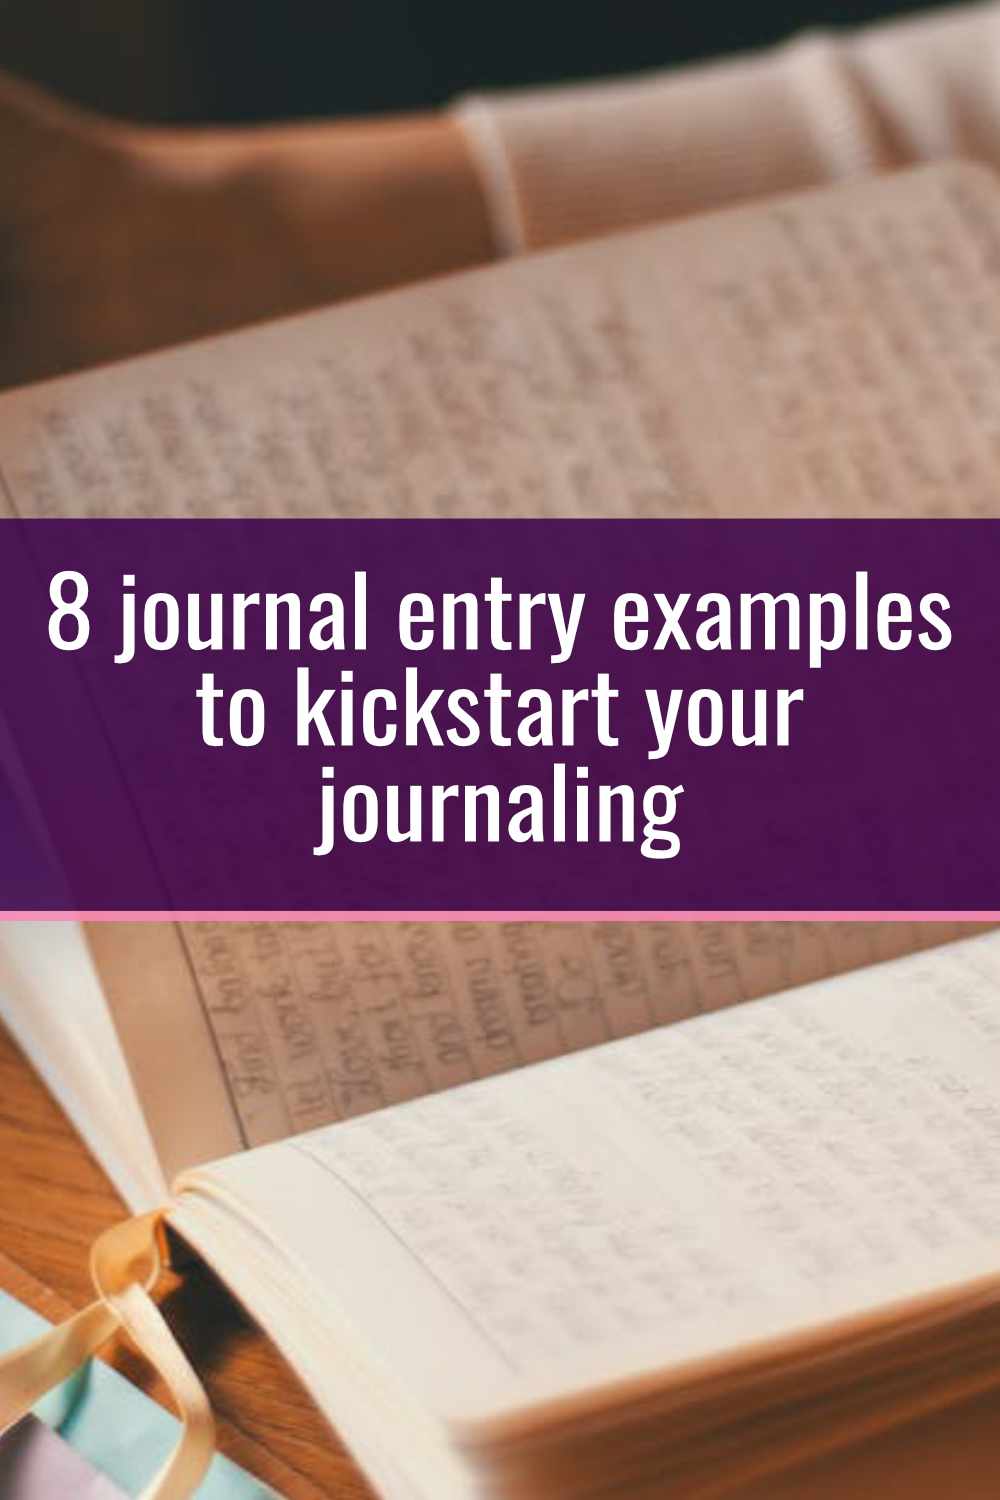 social media image that says 8 journal entry examples to kickstart your journaling